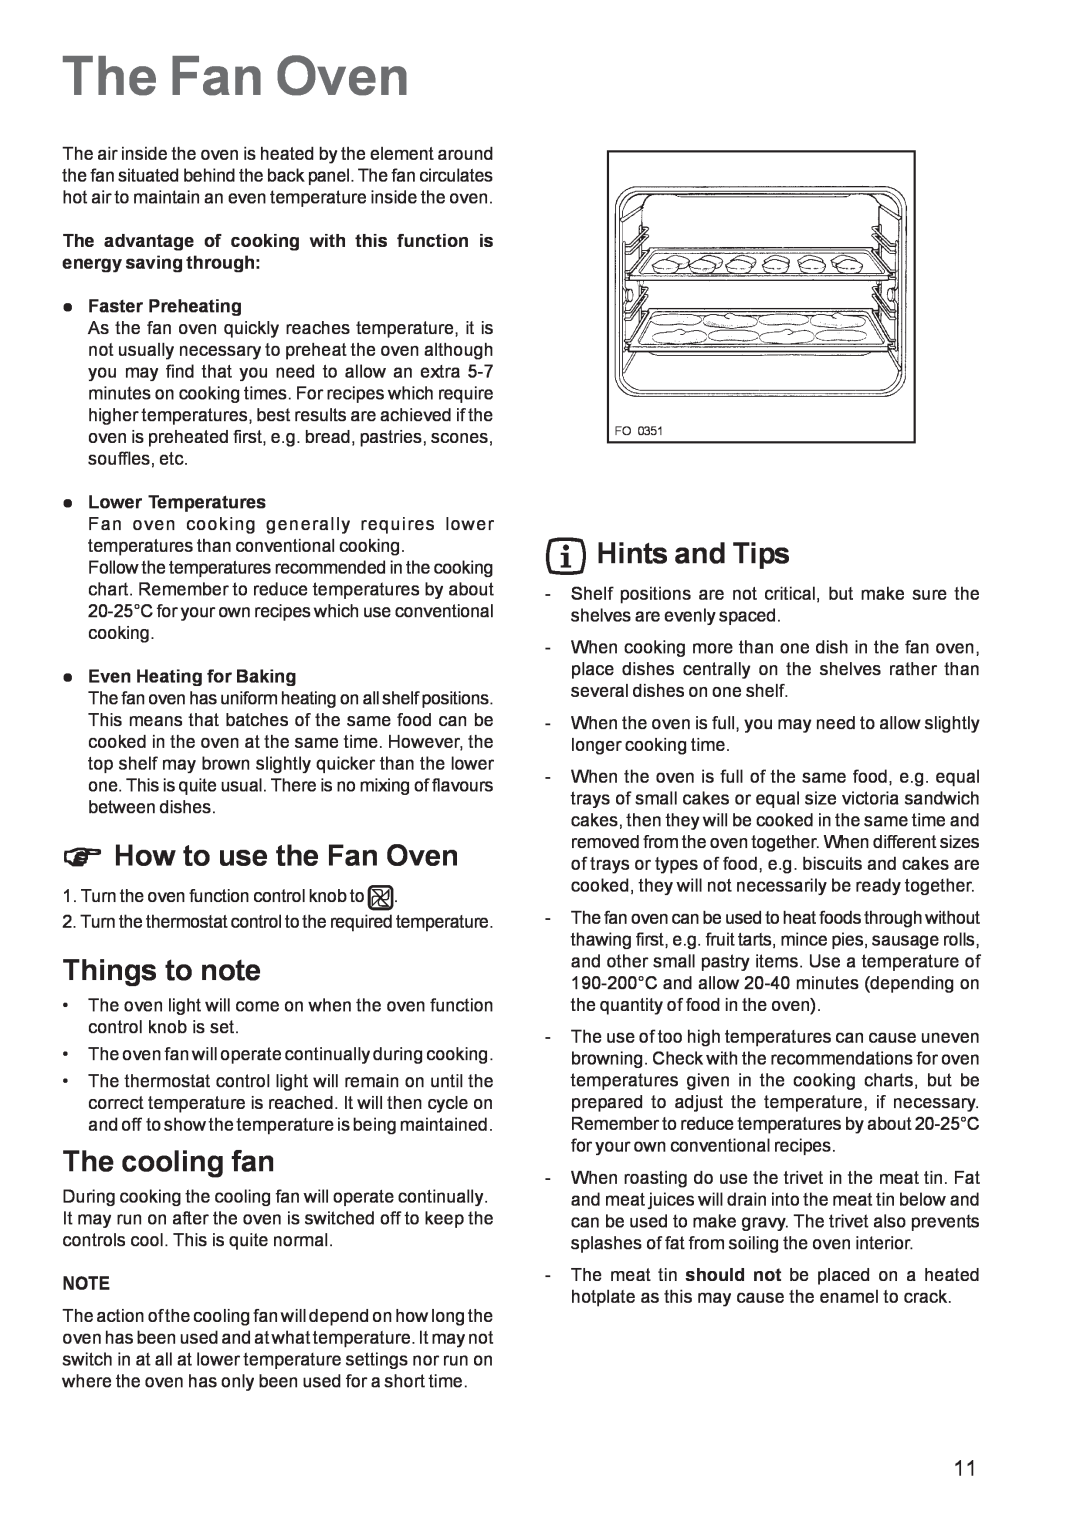 Zanussi ZBS 663 manual The Fan Oven, How to use the Fan Oven, Things to note, The cooling fan, Hints and Tips 